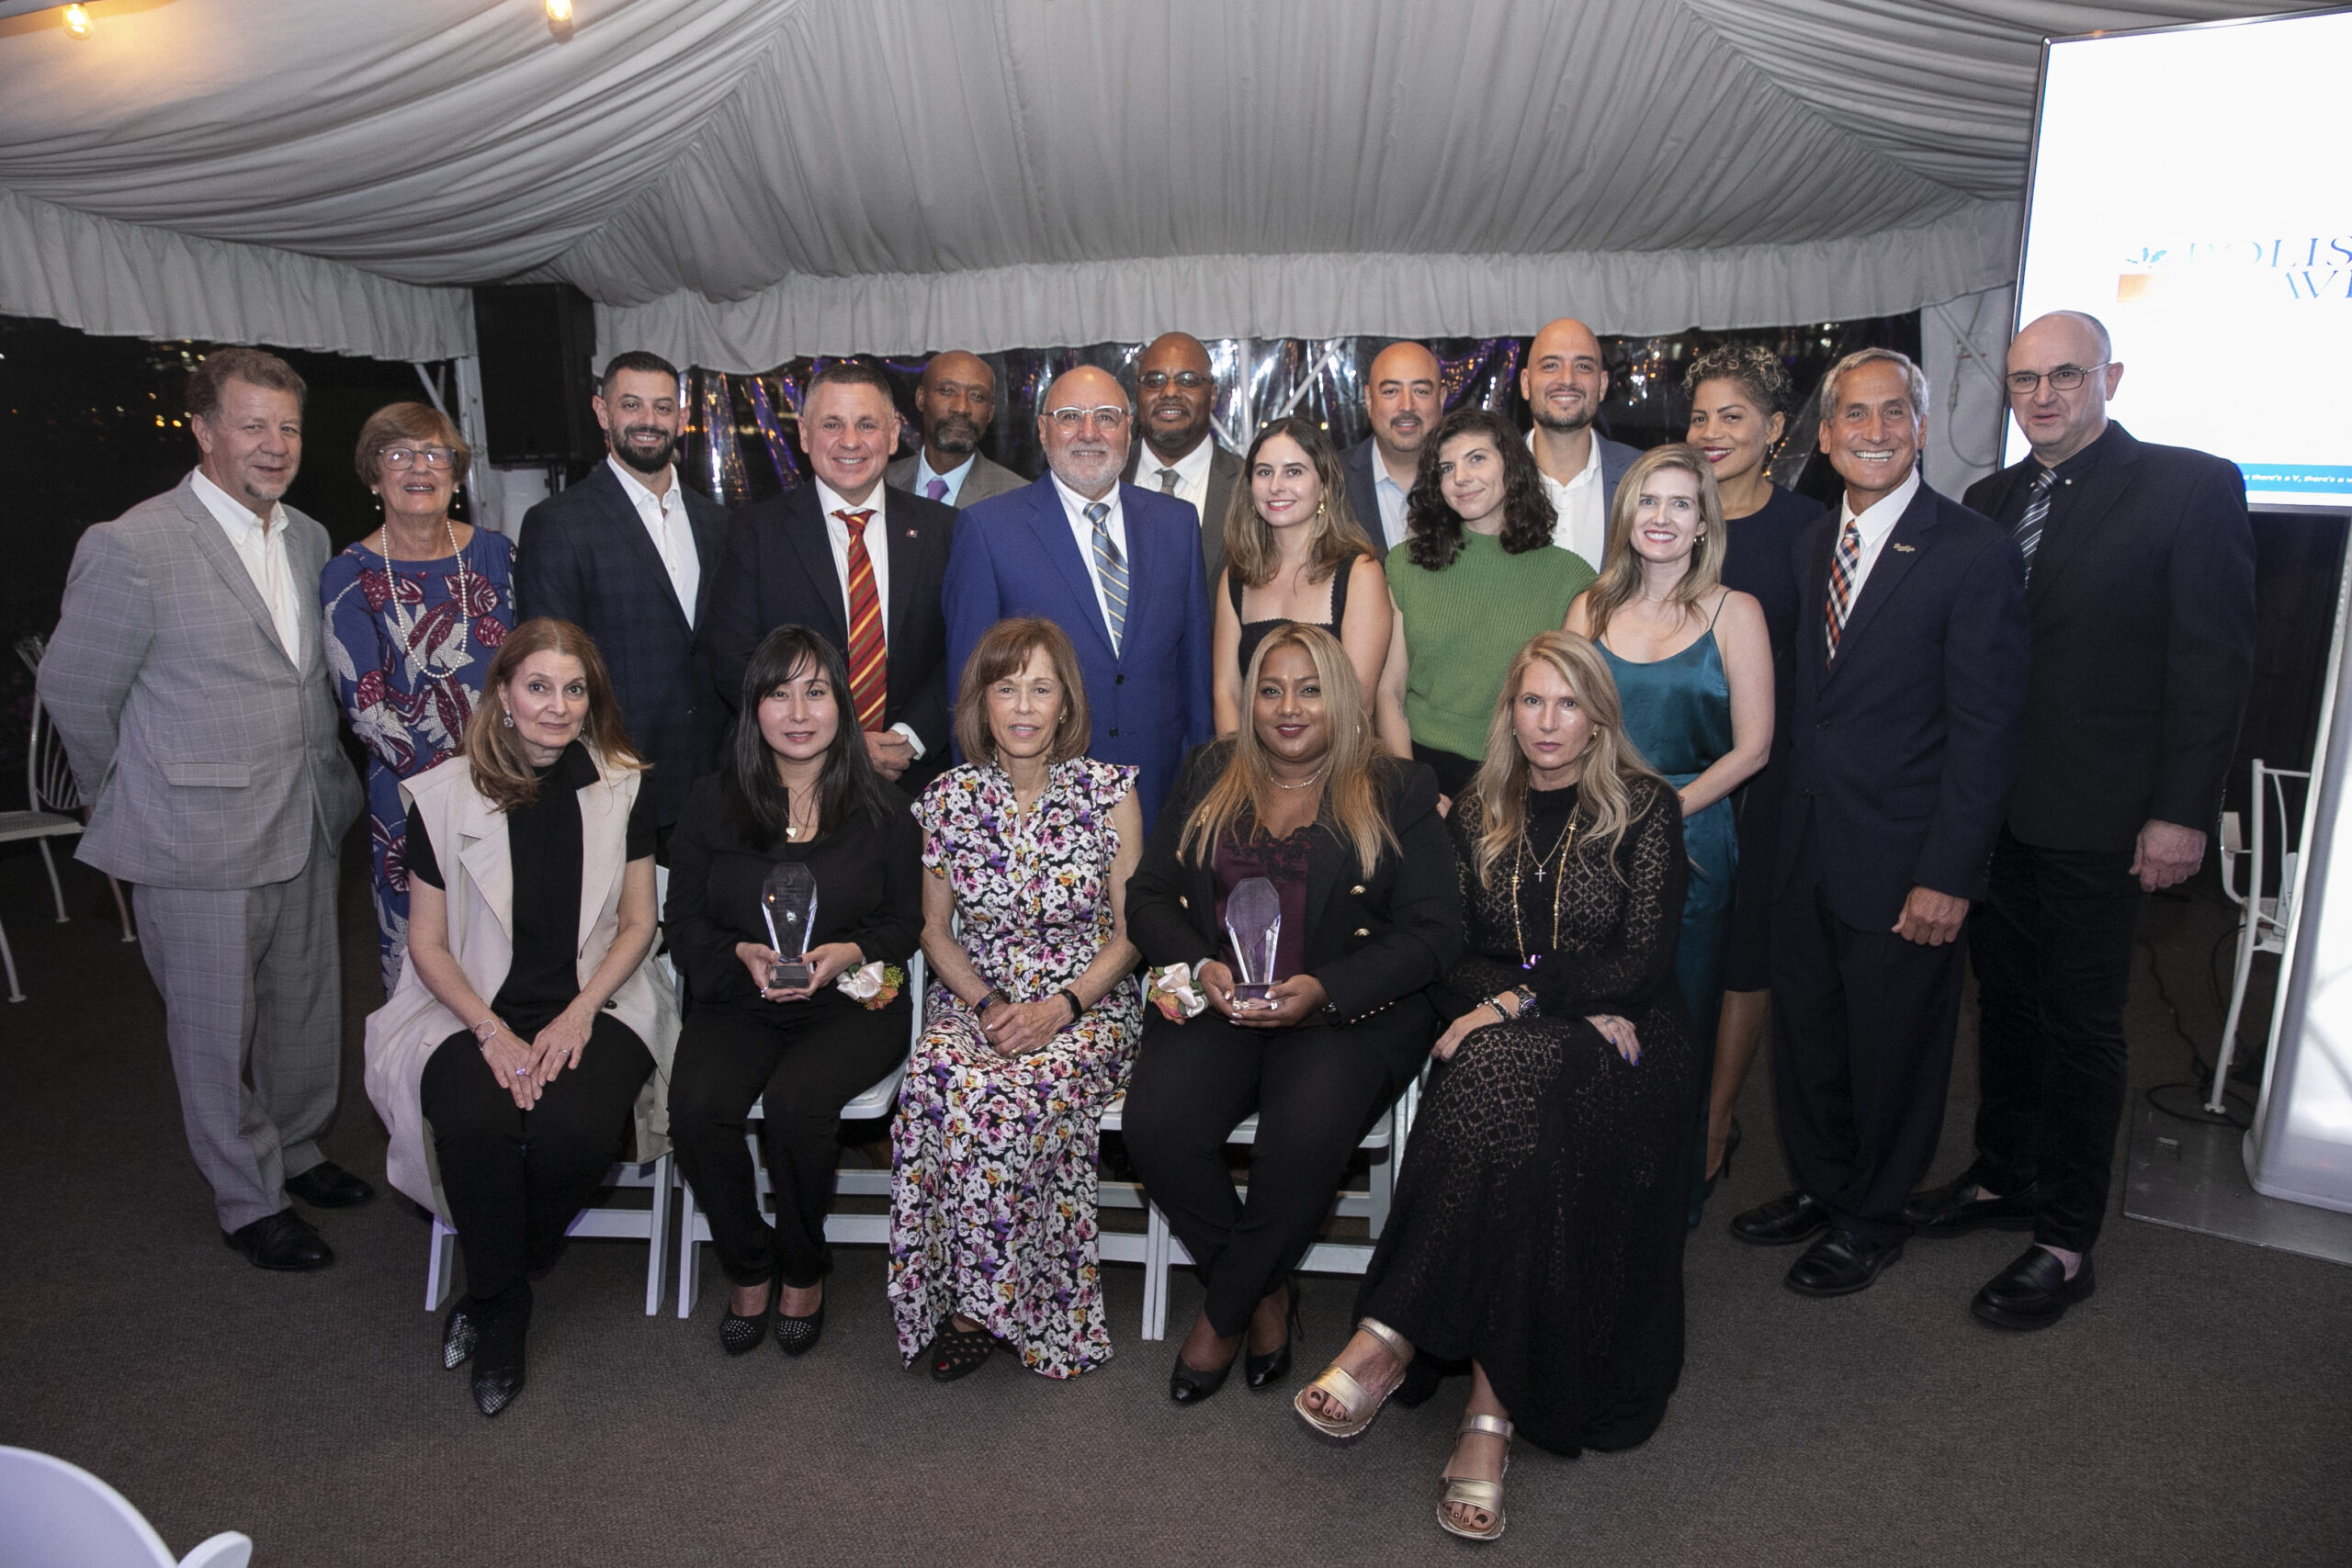 The Honorees with the Greenpoint Y Board at October 2023 Greenpoint Y fundraiser. Photos: John McCarten/North Brooklyn Gazette